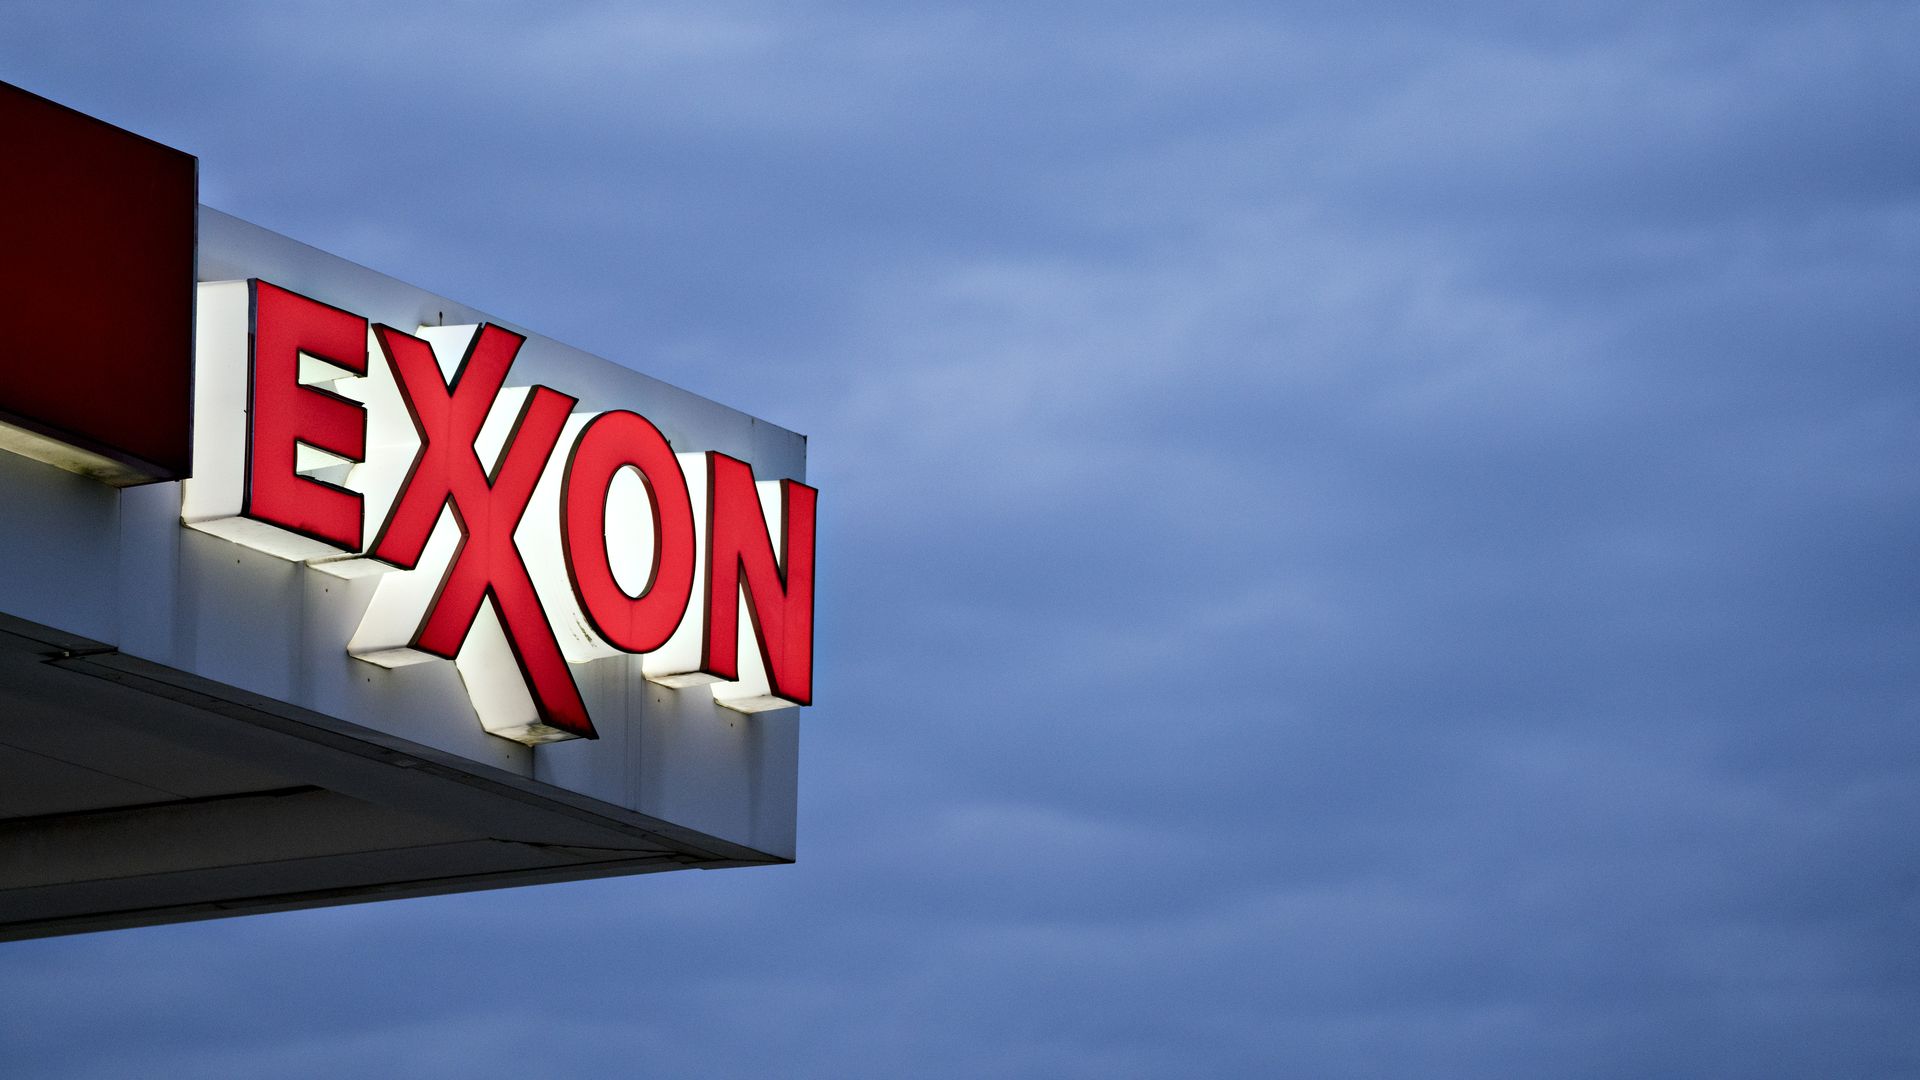 Picture of a red "Exxon" sign